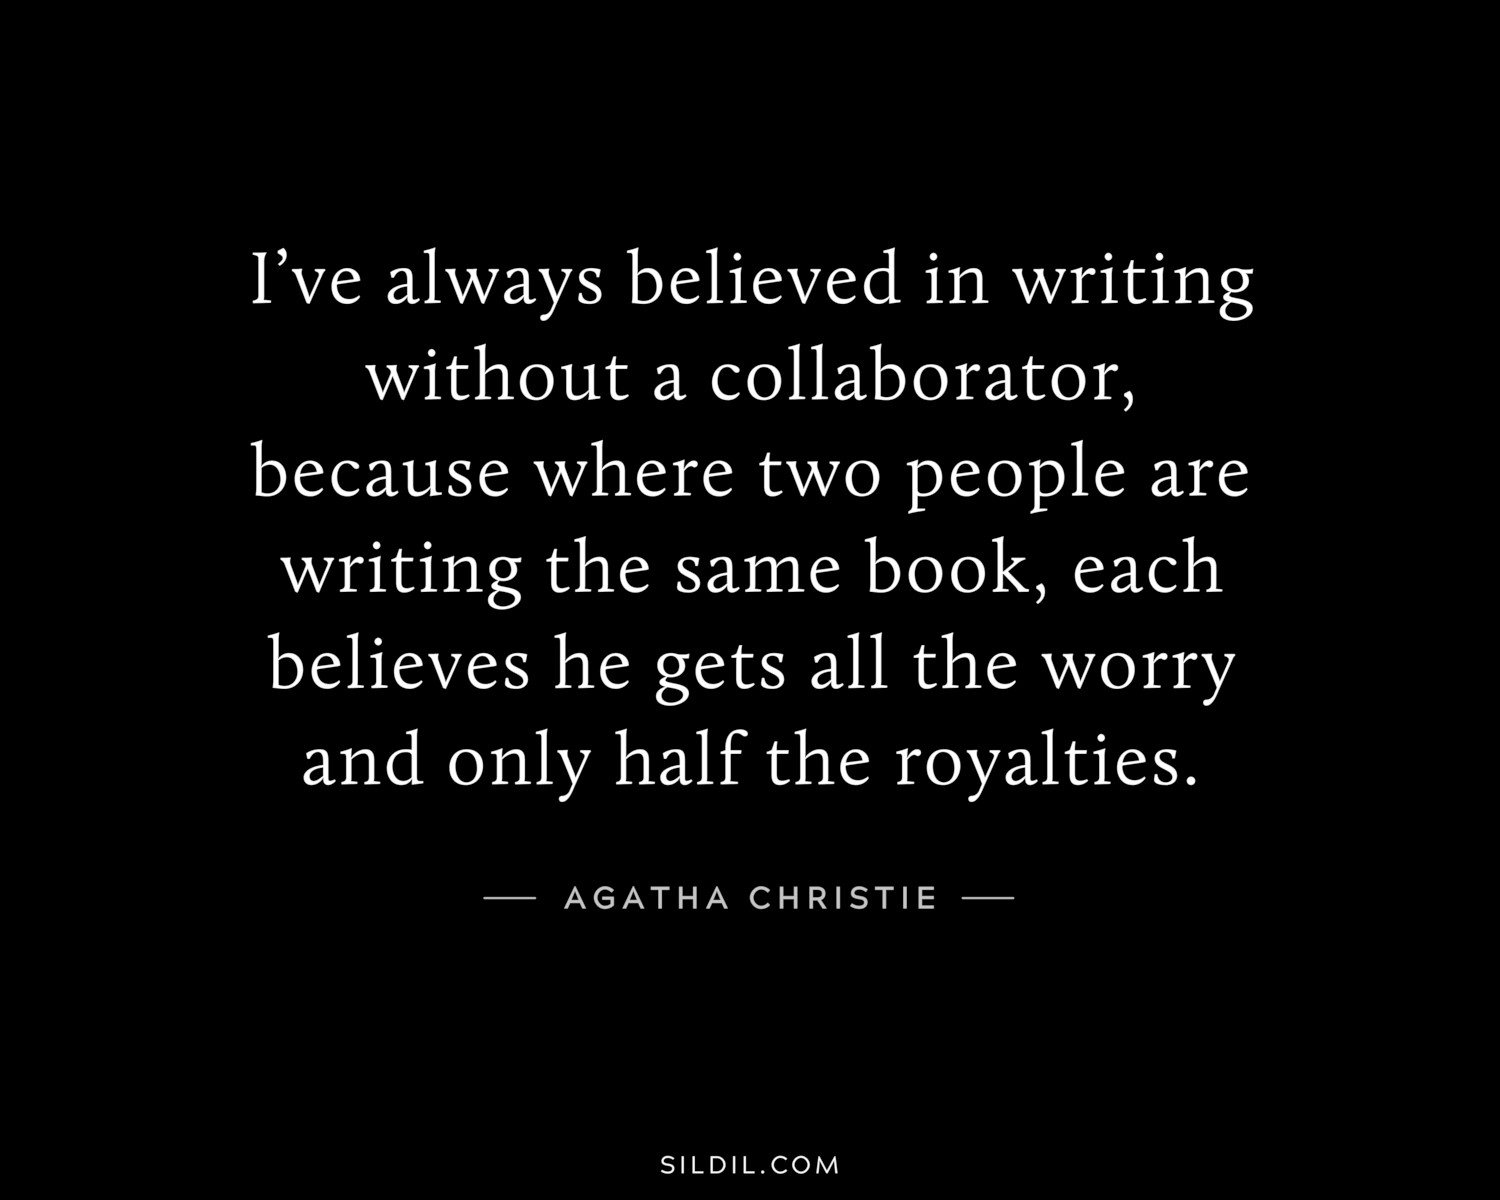 I’ve always believed in writing without a collaborator, because where two people are writing the same book, each believes he gets all the worry and only half the royalties.